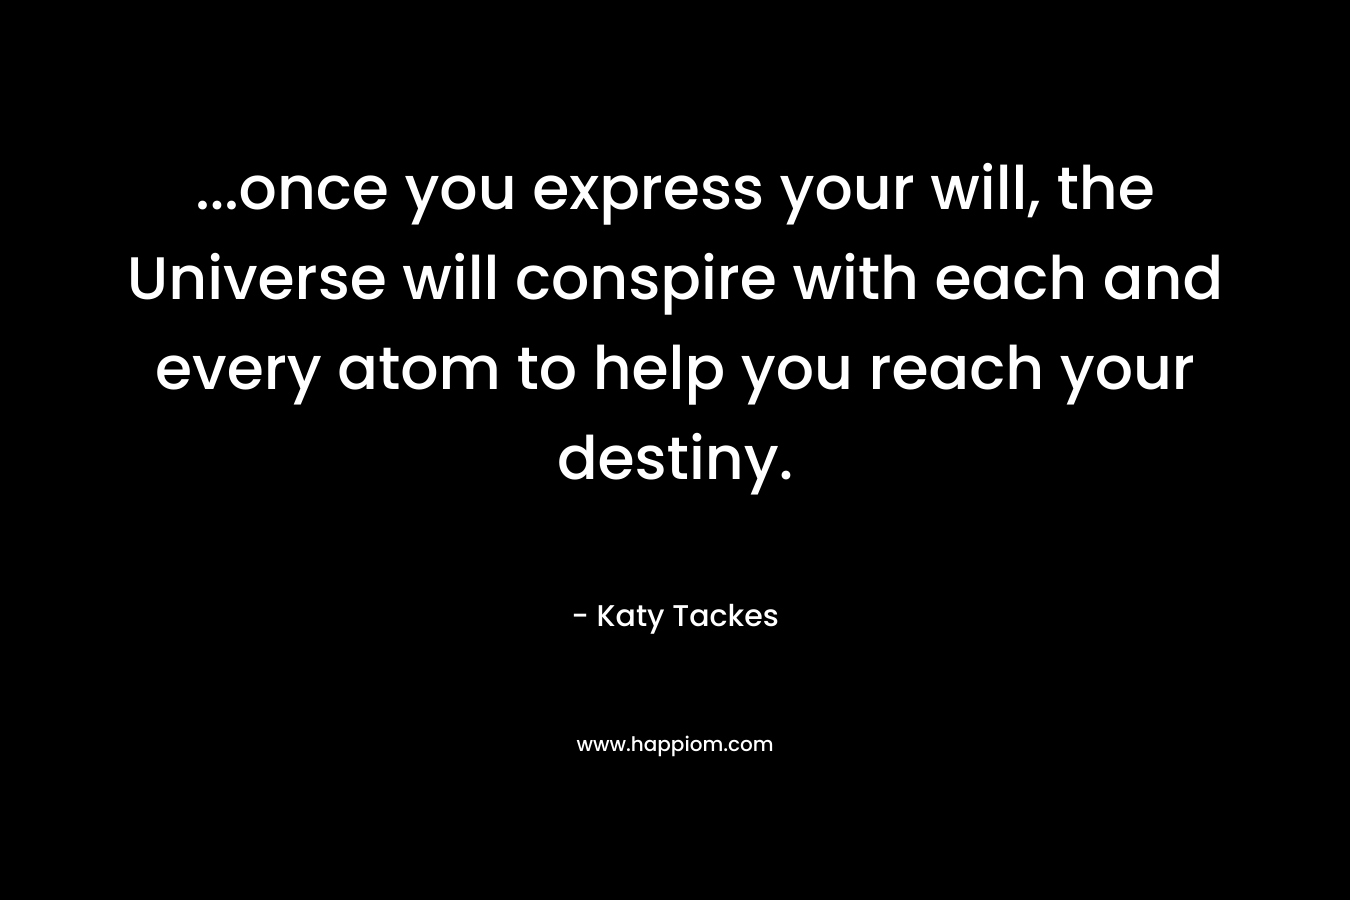 …once you express your will, the Universe will conspire with each and every atom to help you reach your destiny. – Katy Tackes